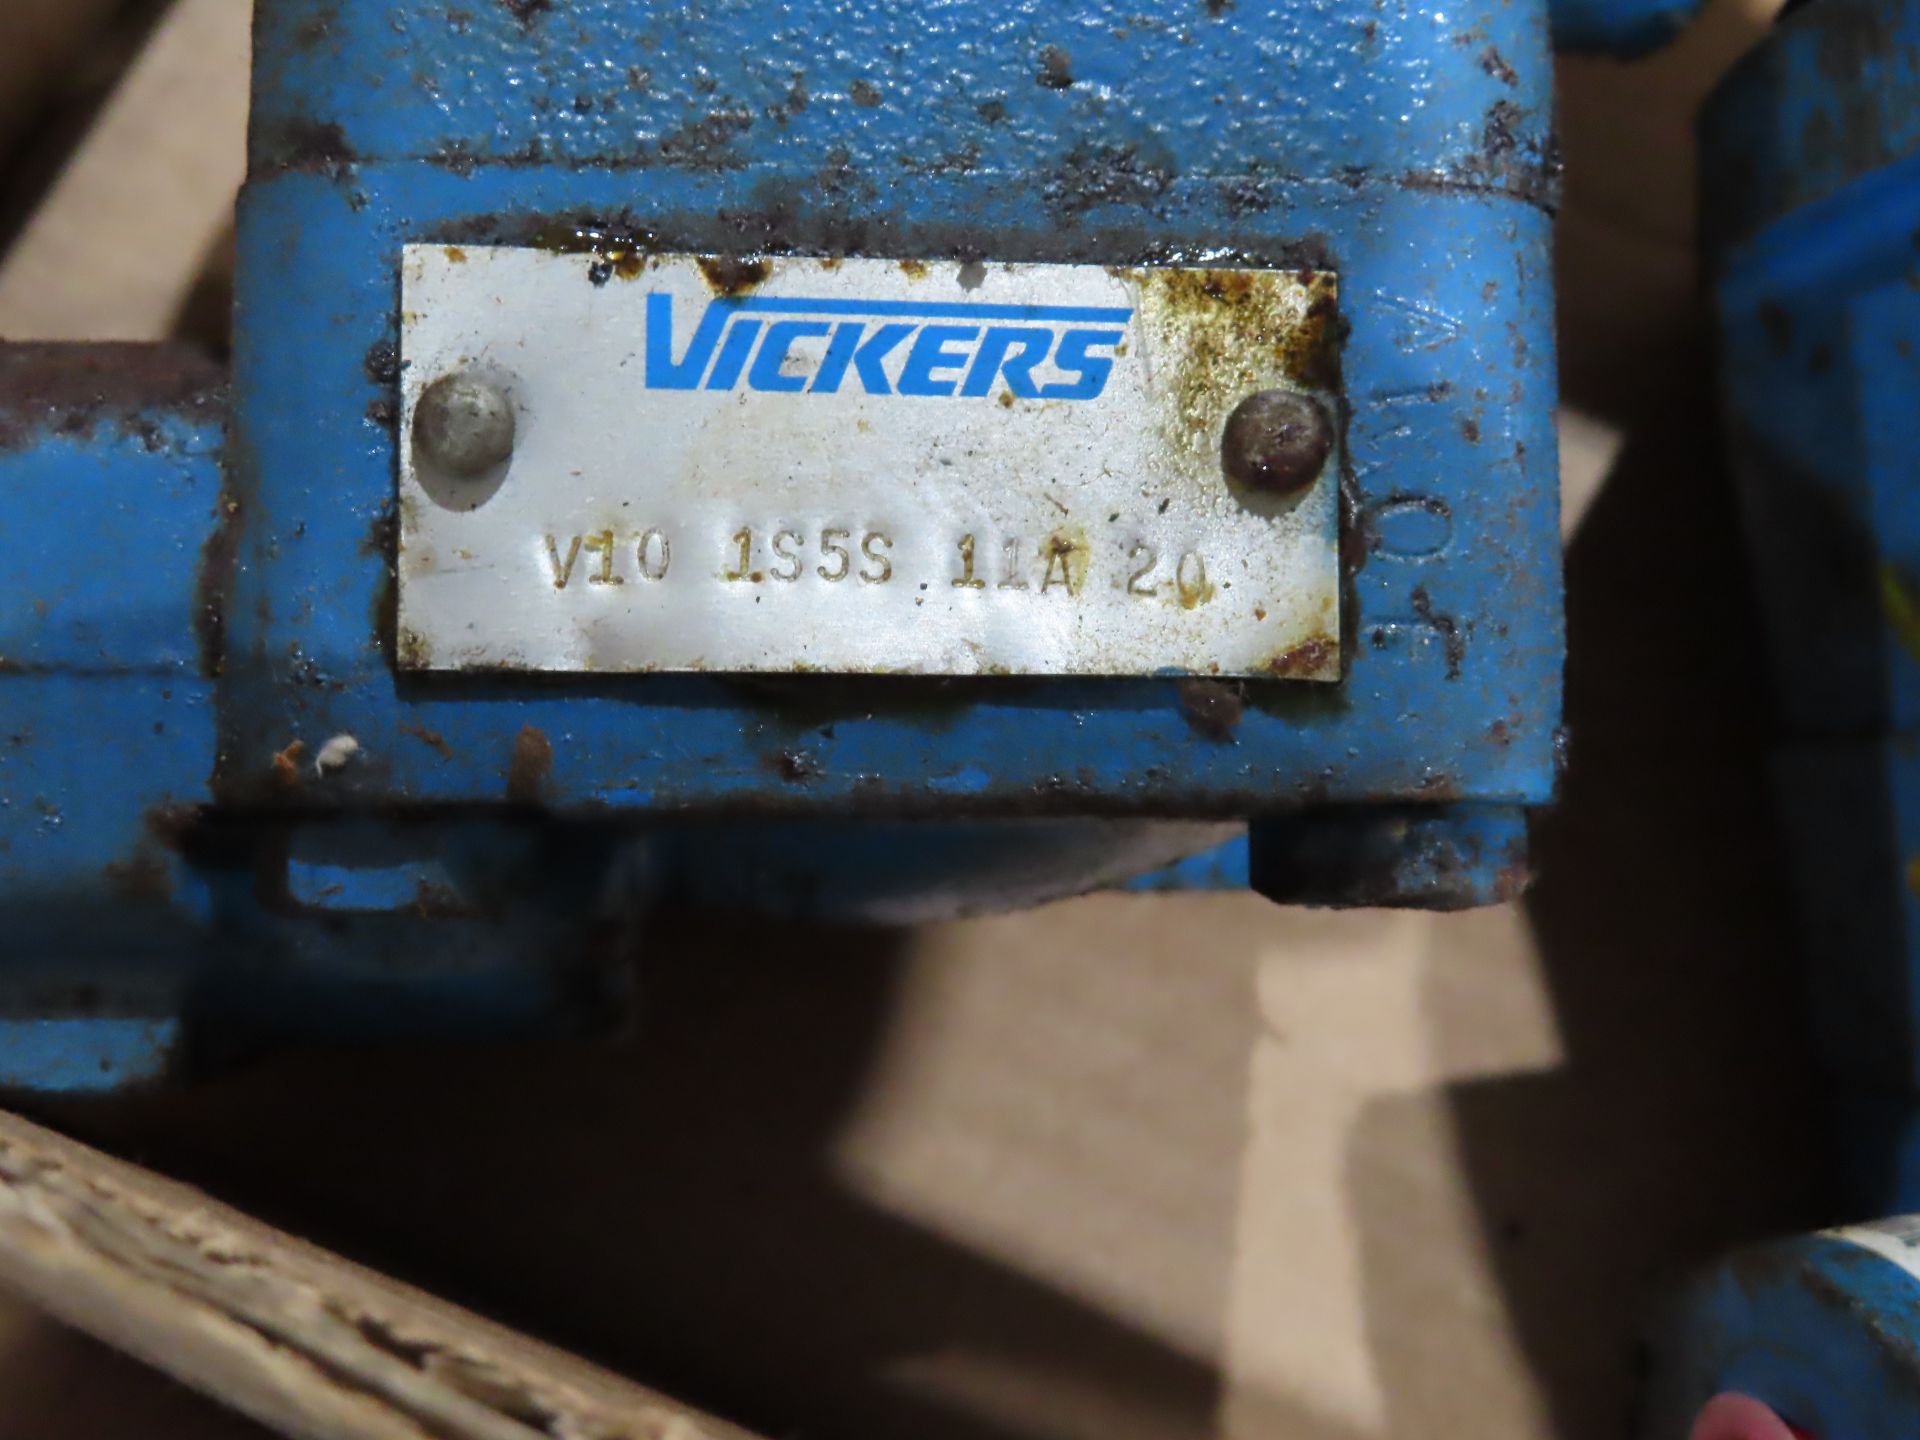 Qty 2 Vickers model V10-1S5S-11A-20, used parts crib spare, as always with Brolyn LLC auctions, - Image 2 of 2